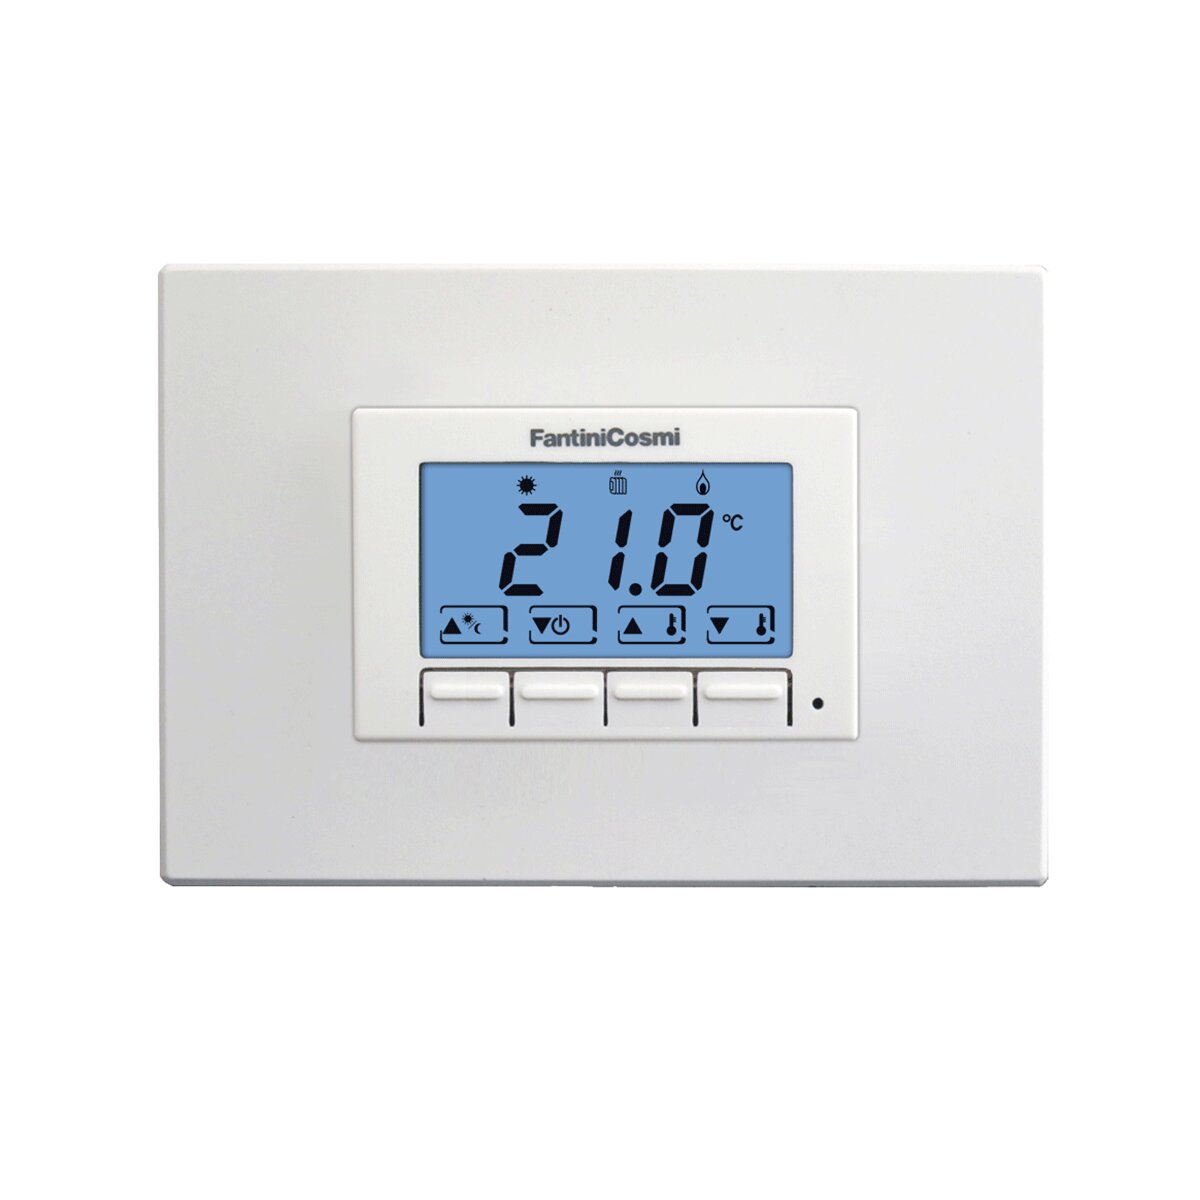 Fantini Cosmi CH121 built-in electronic microprocessor room thermostat